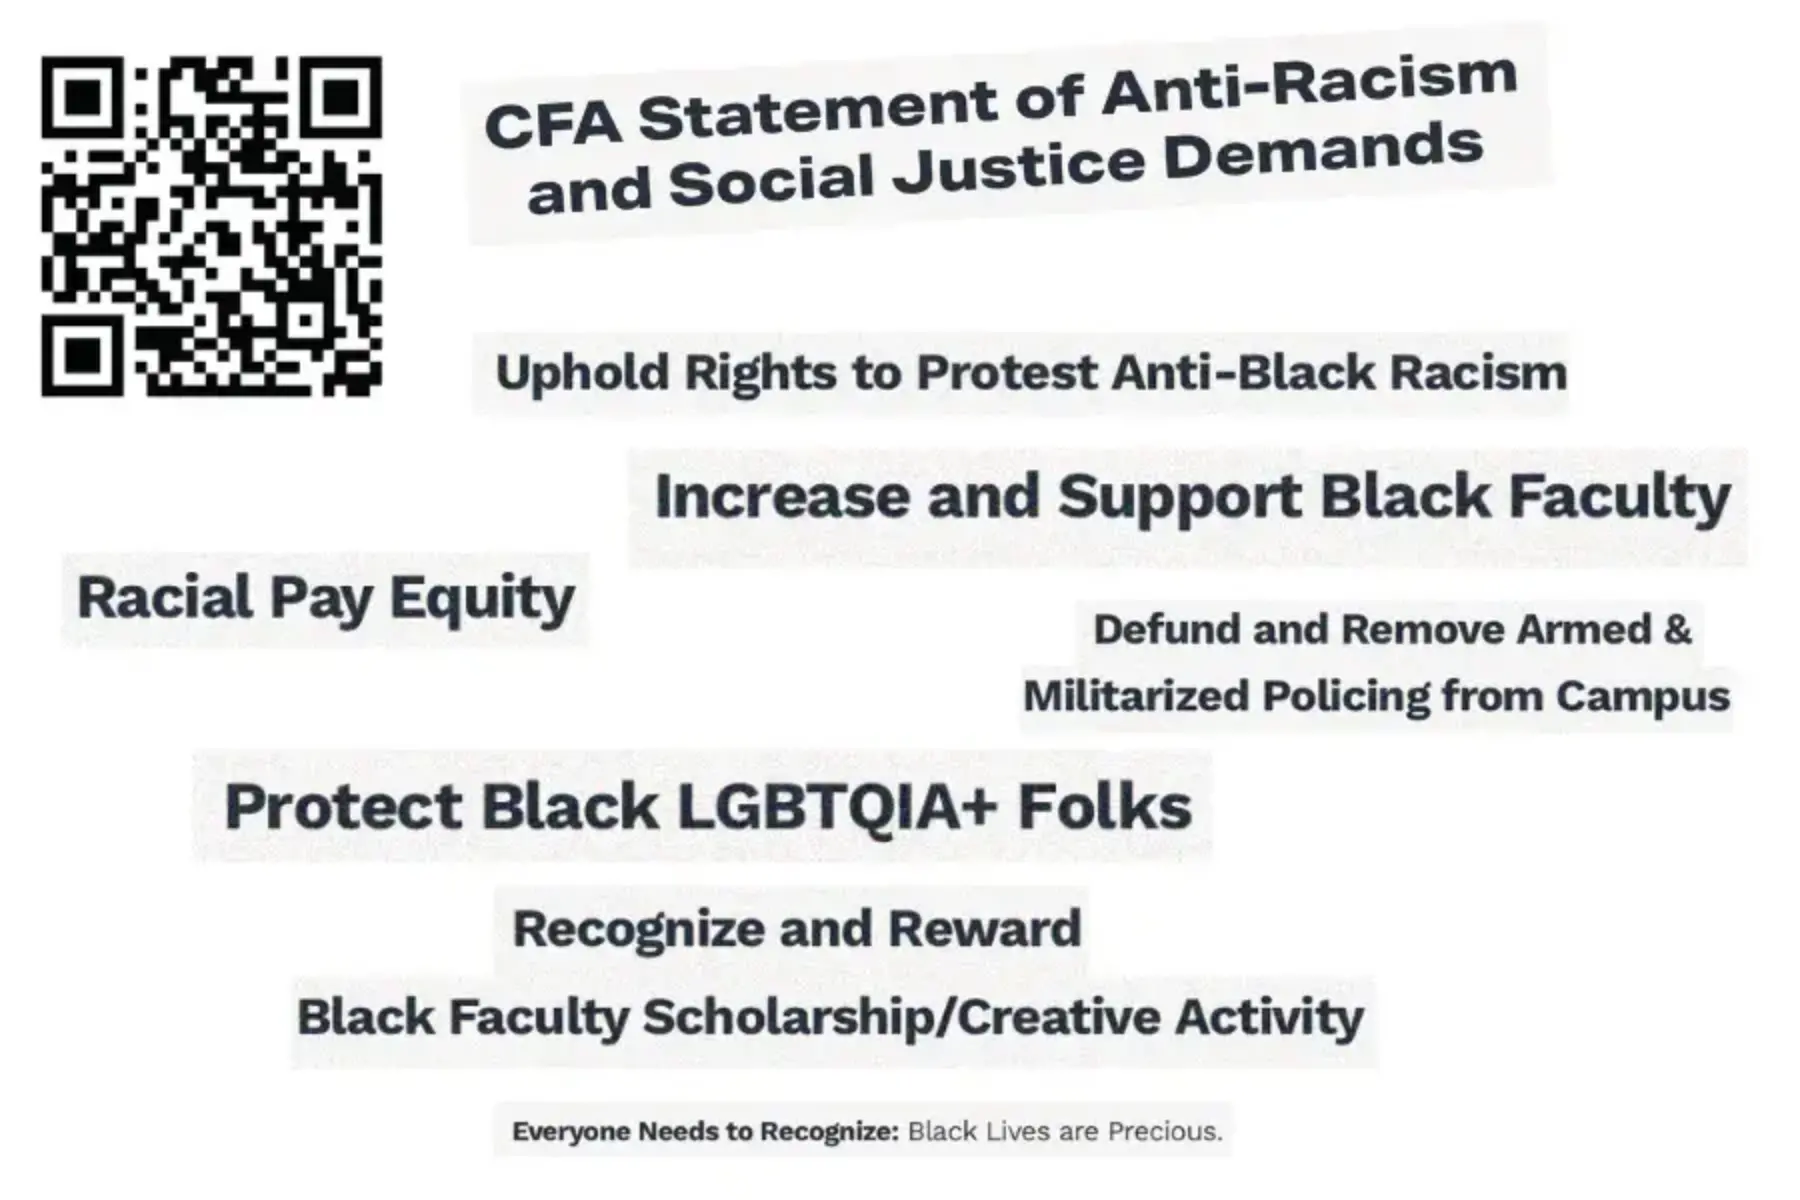 White background with groups of black words cut out from a report. The cut outs say: CFA Statement of Anti-Racism and Social Justice Demands; Uphold Rights to Protest Anti-Black Racism; Increase and Support Black Faculty; Racial Pay Equity; Defund and Remove Armed & Militarized Policing from Campus; Protect Black LGBTQIA+ Folks; Recognize and Reward Black Faculty Scholarship/Creative Activity; Everyone Needs to Recognize: Black Lives are Precious. A black and white QR code at the top left side takes people to https://www.calfac.org/cfa-statement-of-anti-racism-and-social-justice-demands/